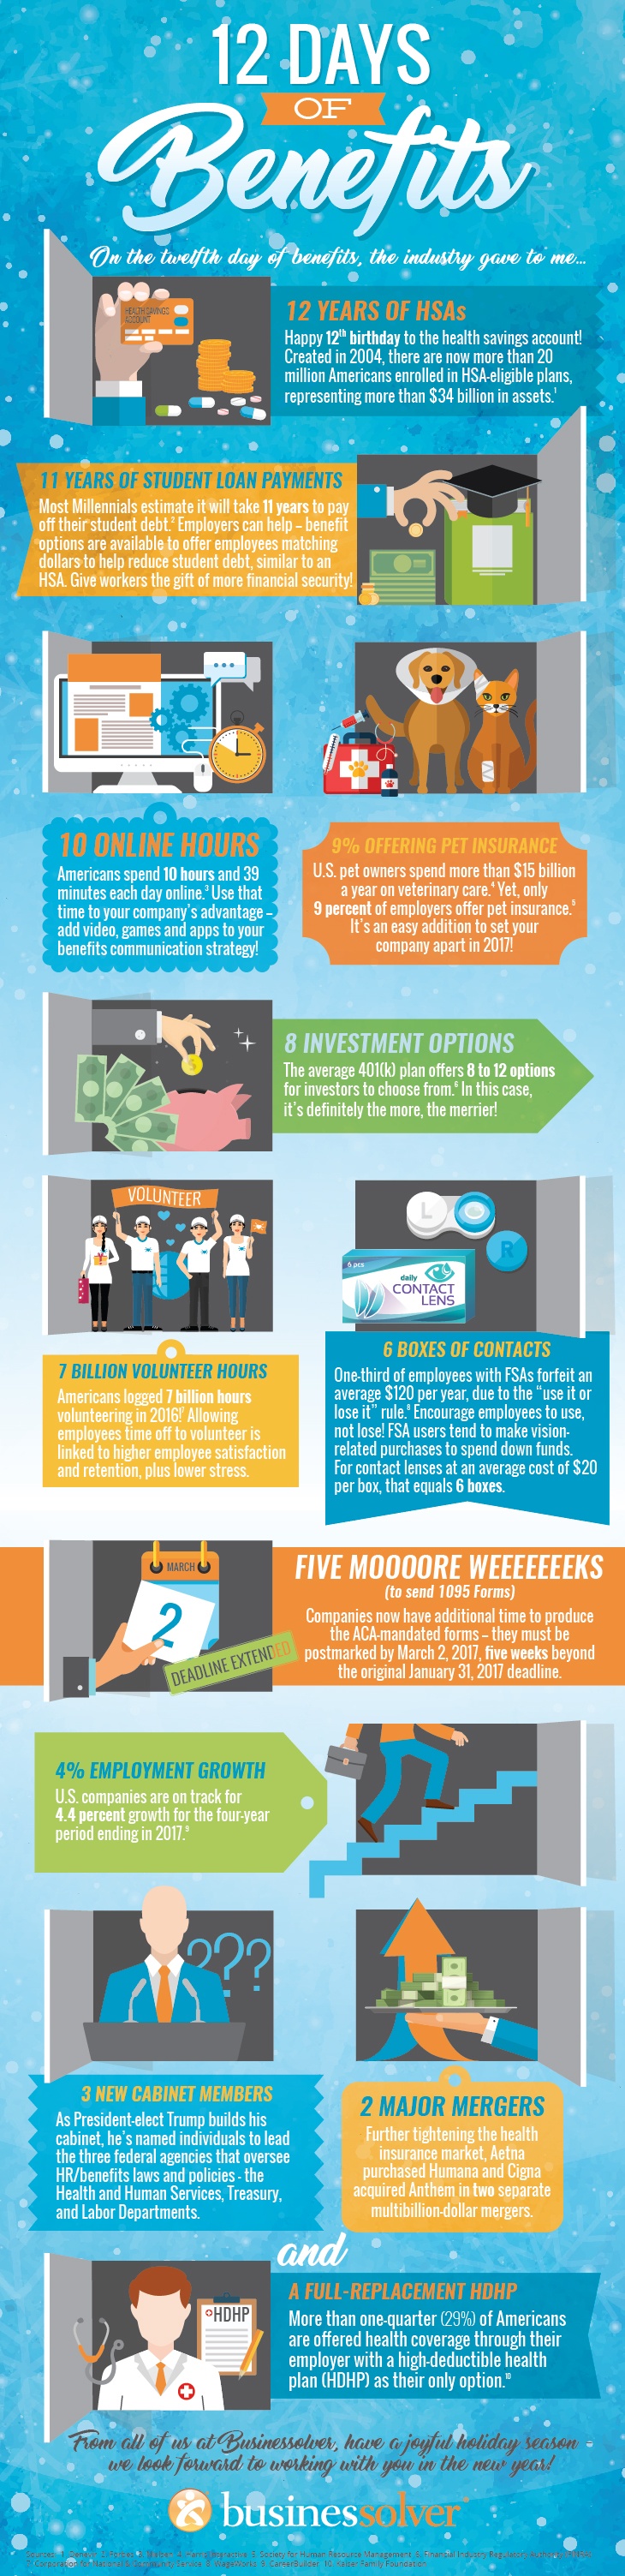 12 Days of Benefits 2016 Infographic